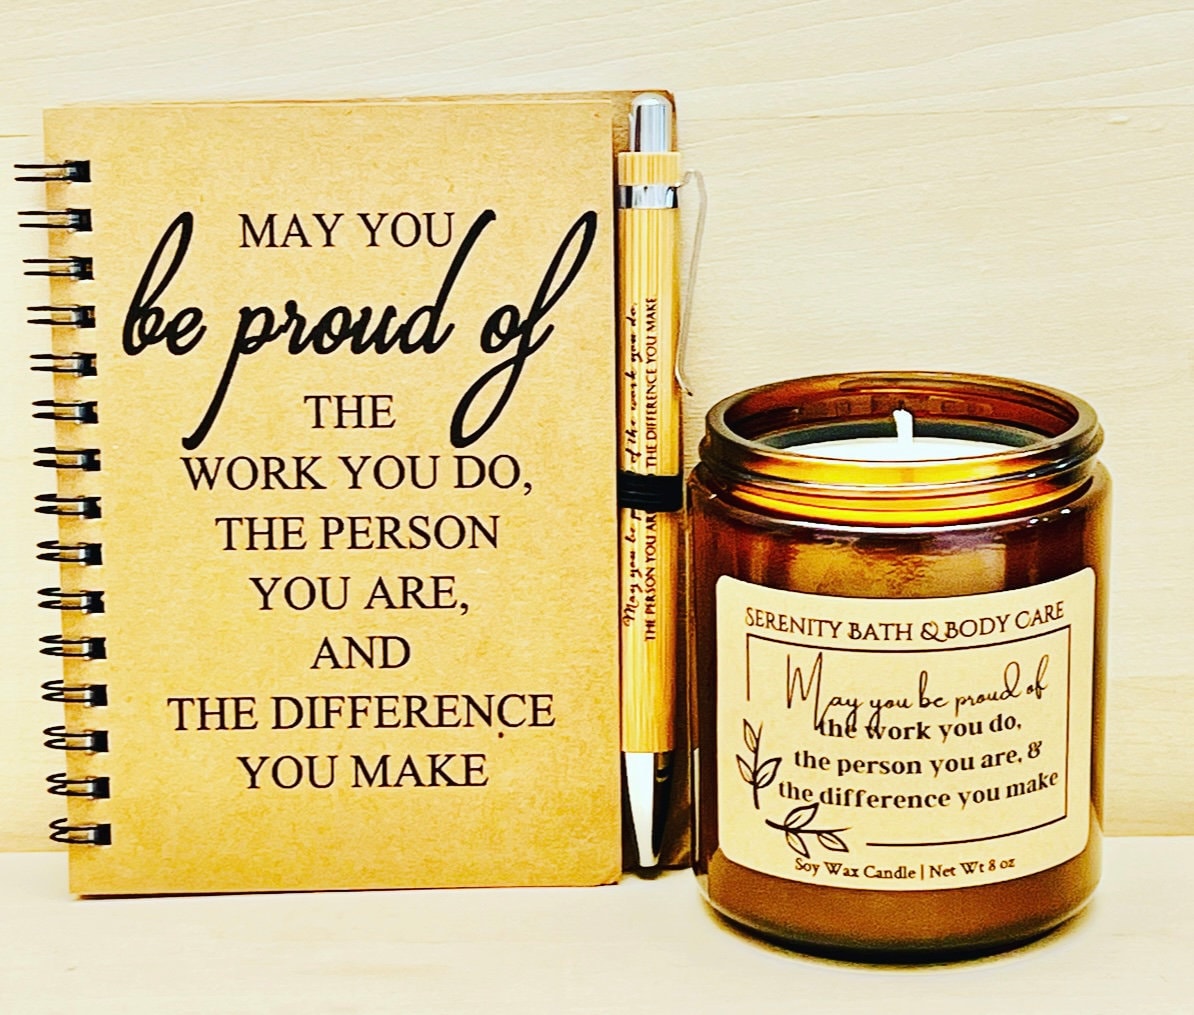 15 Examples of Thank You to Coworkers for Gift